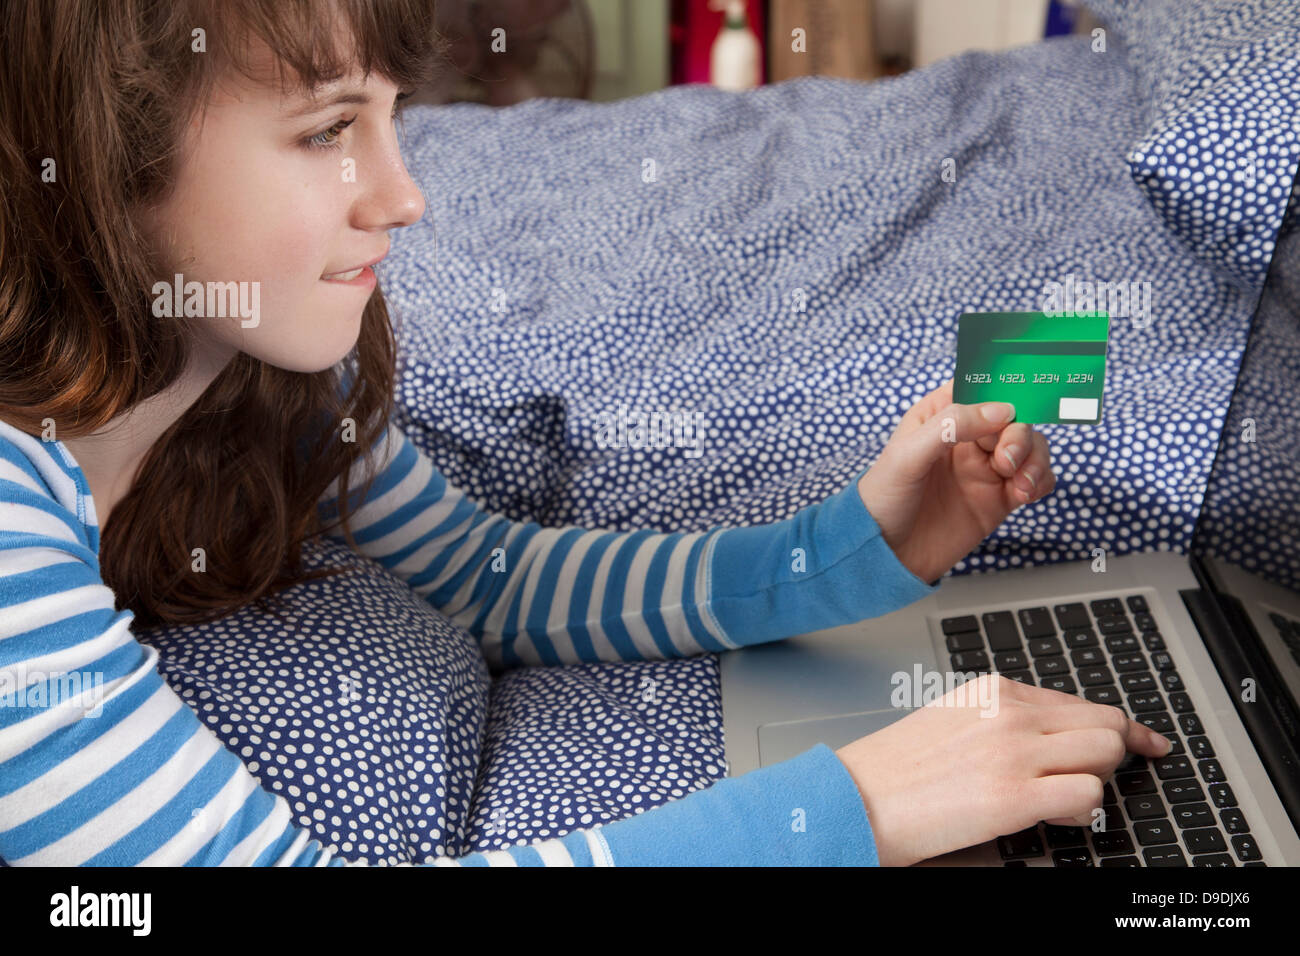 Girl lying on bed with laptop internet shopping Banque D'Images